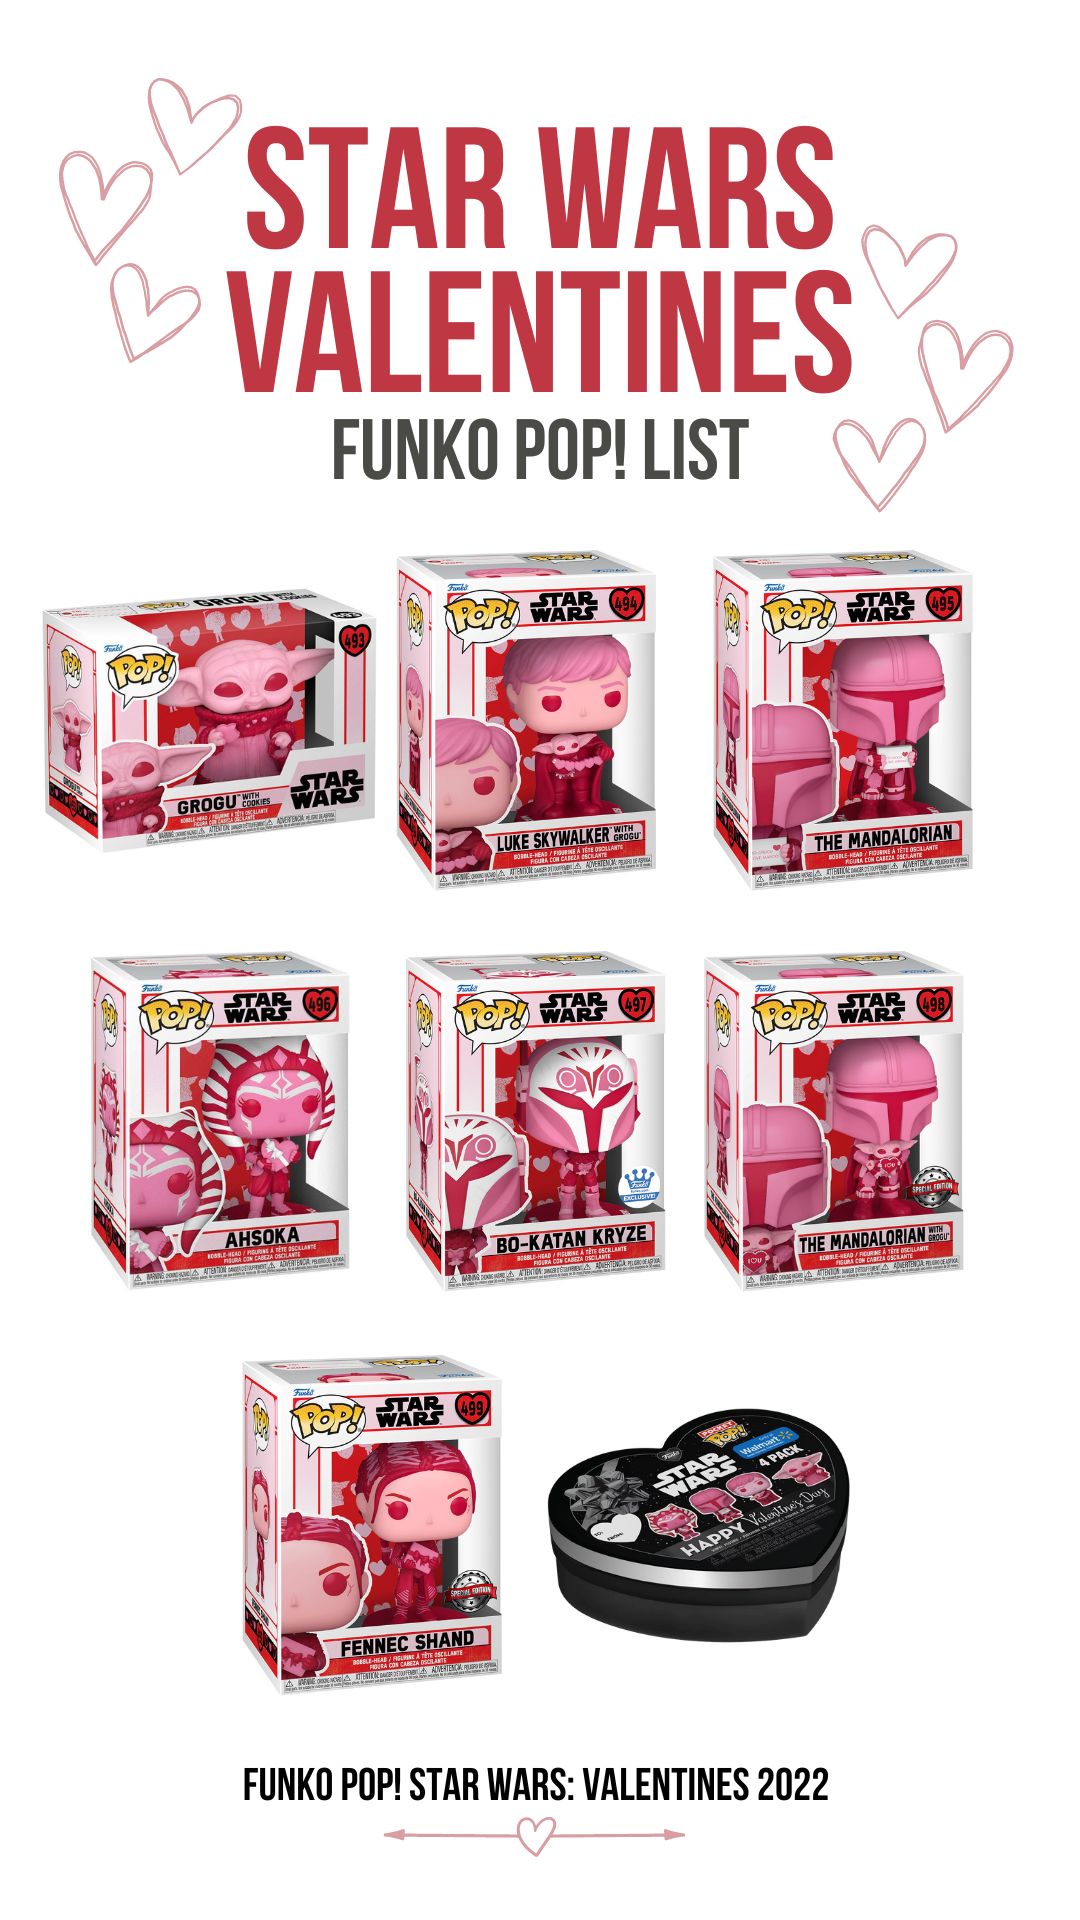 Star Wars Funko Pop Valentines List of Figures in Boxes 2022